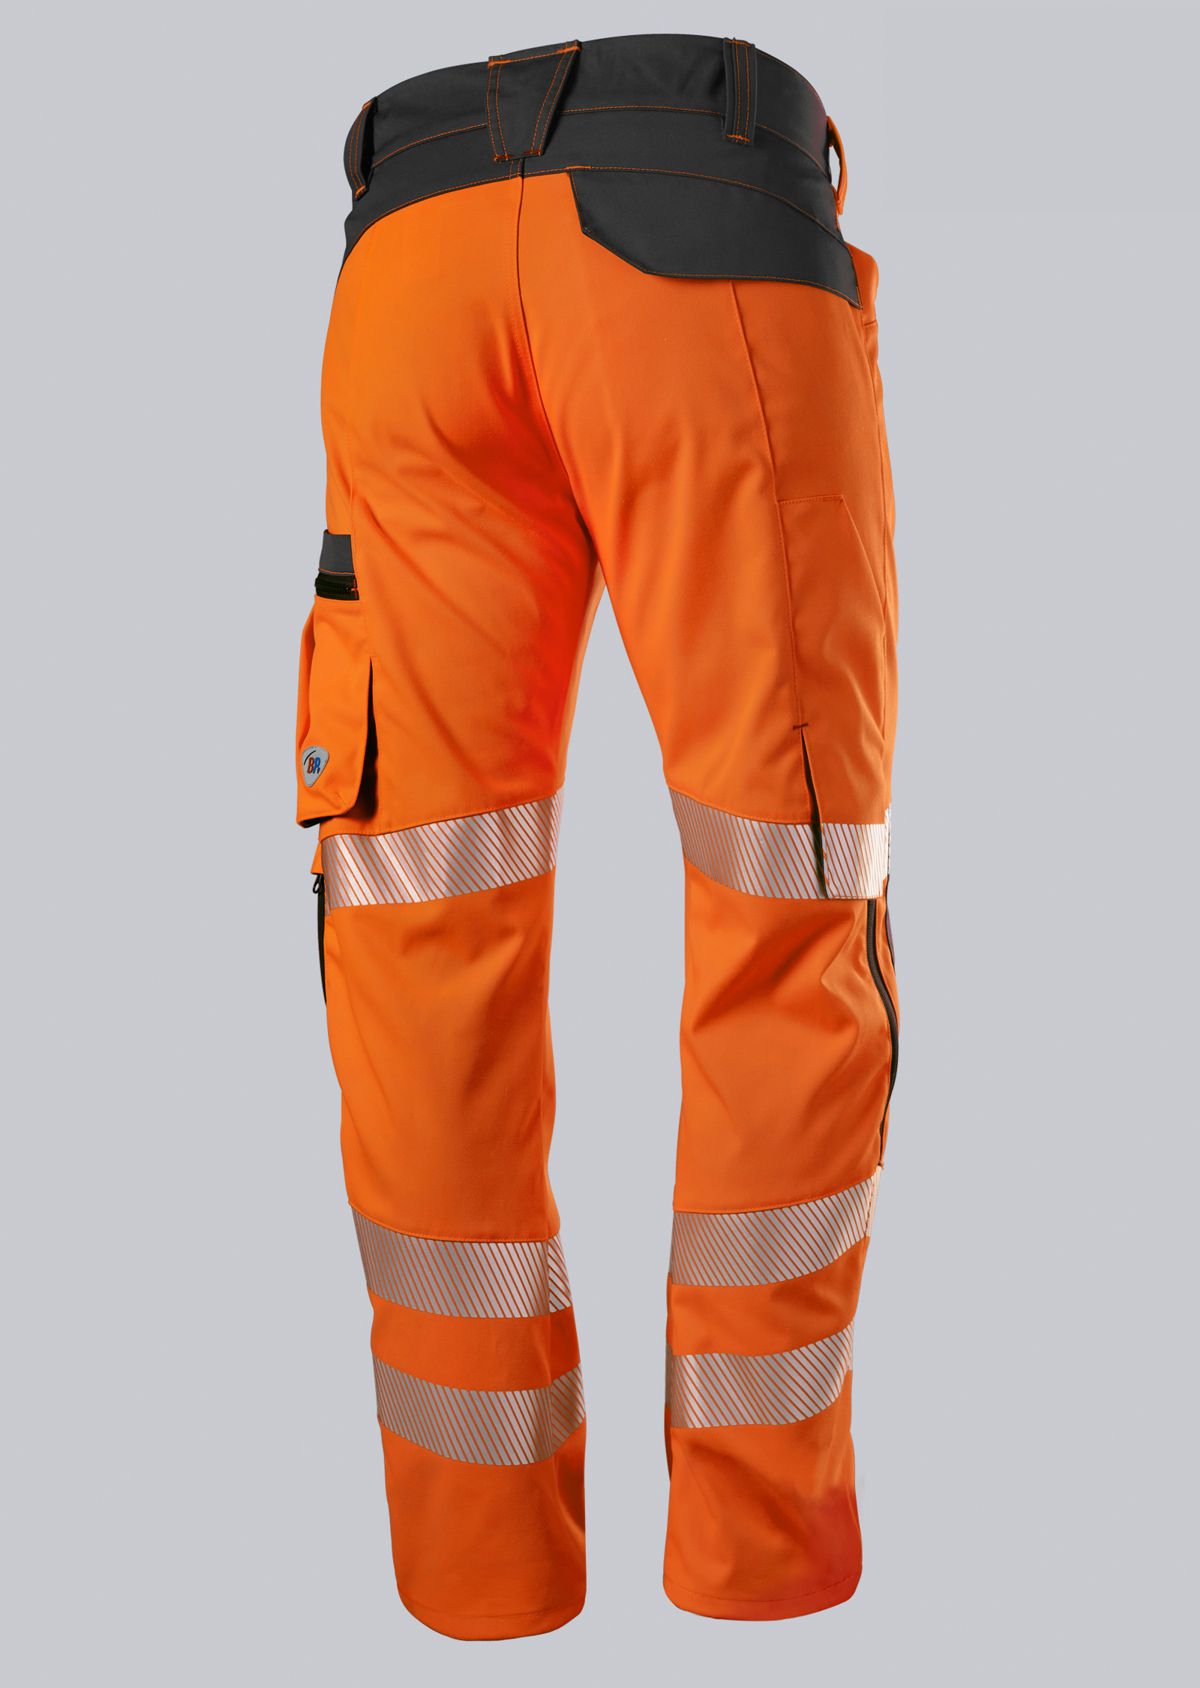 BP® Lightweight high-visibility stretch trousers, knee pockets